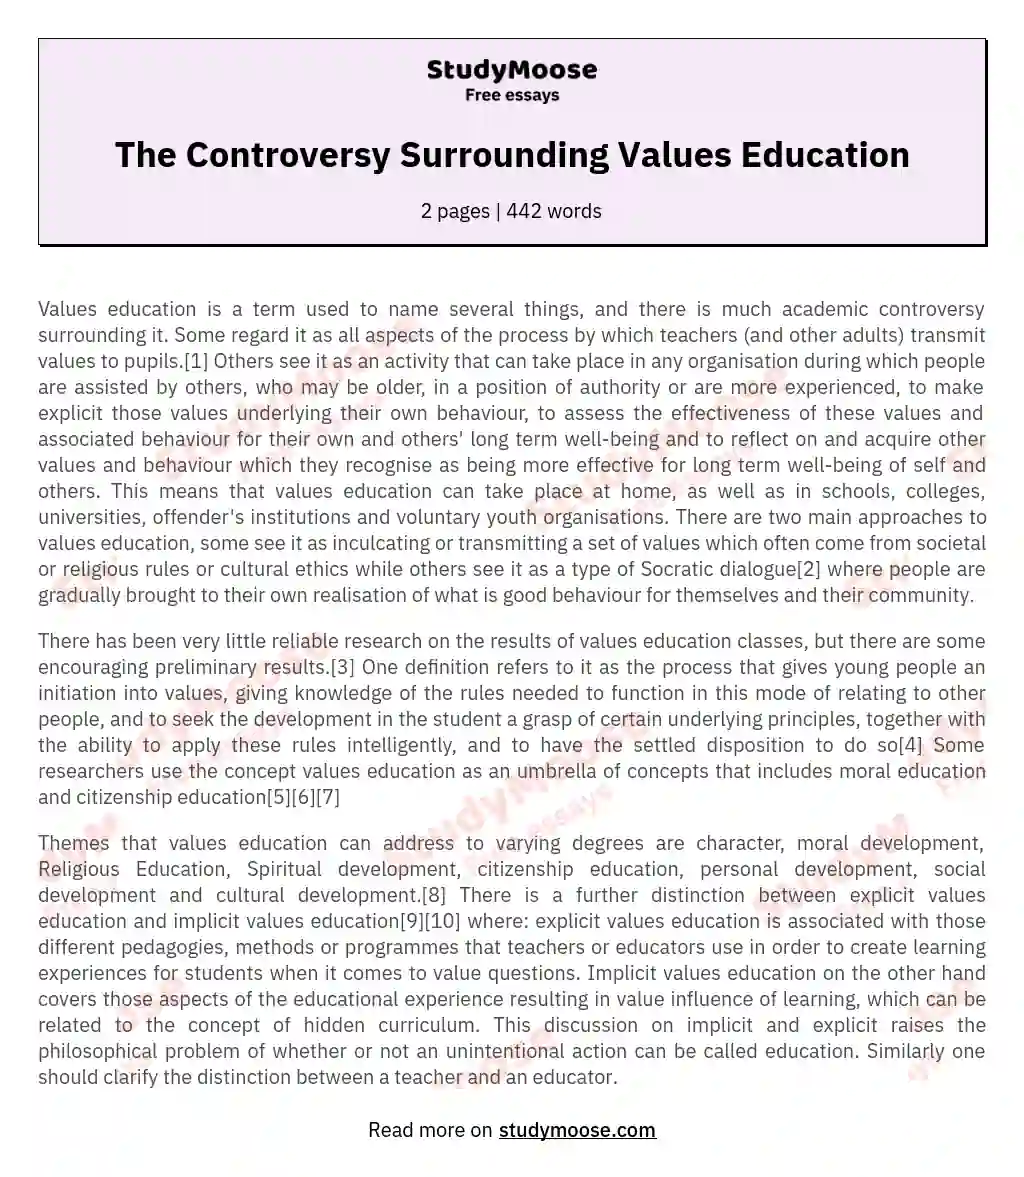 The Controversy Surrounding Values Education essay